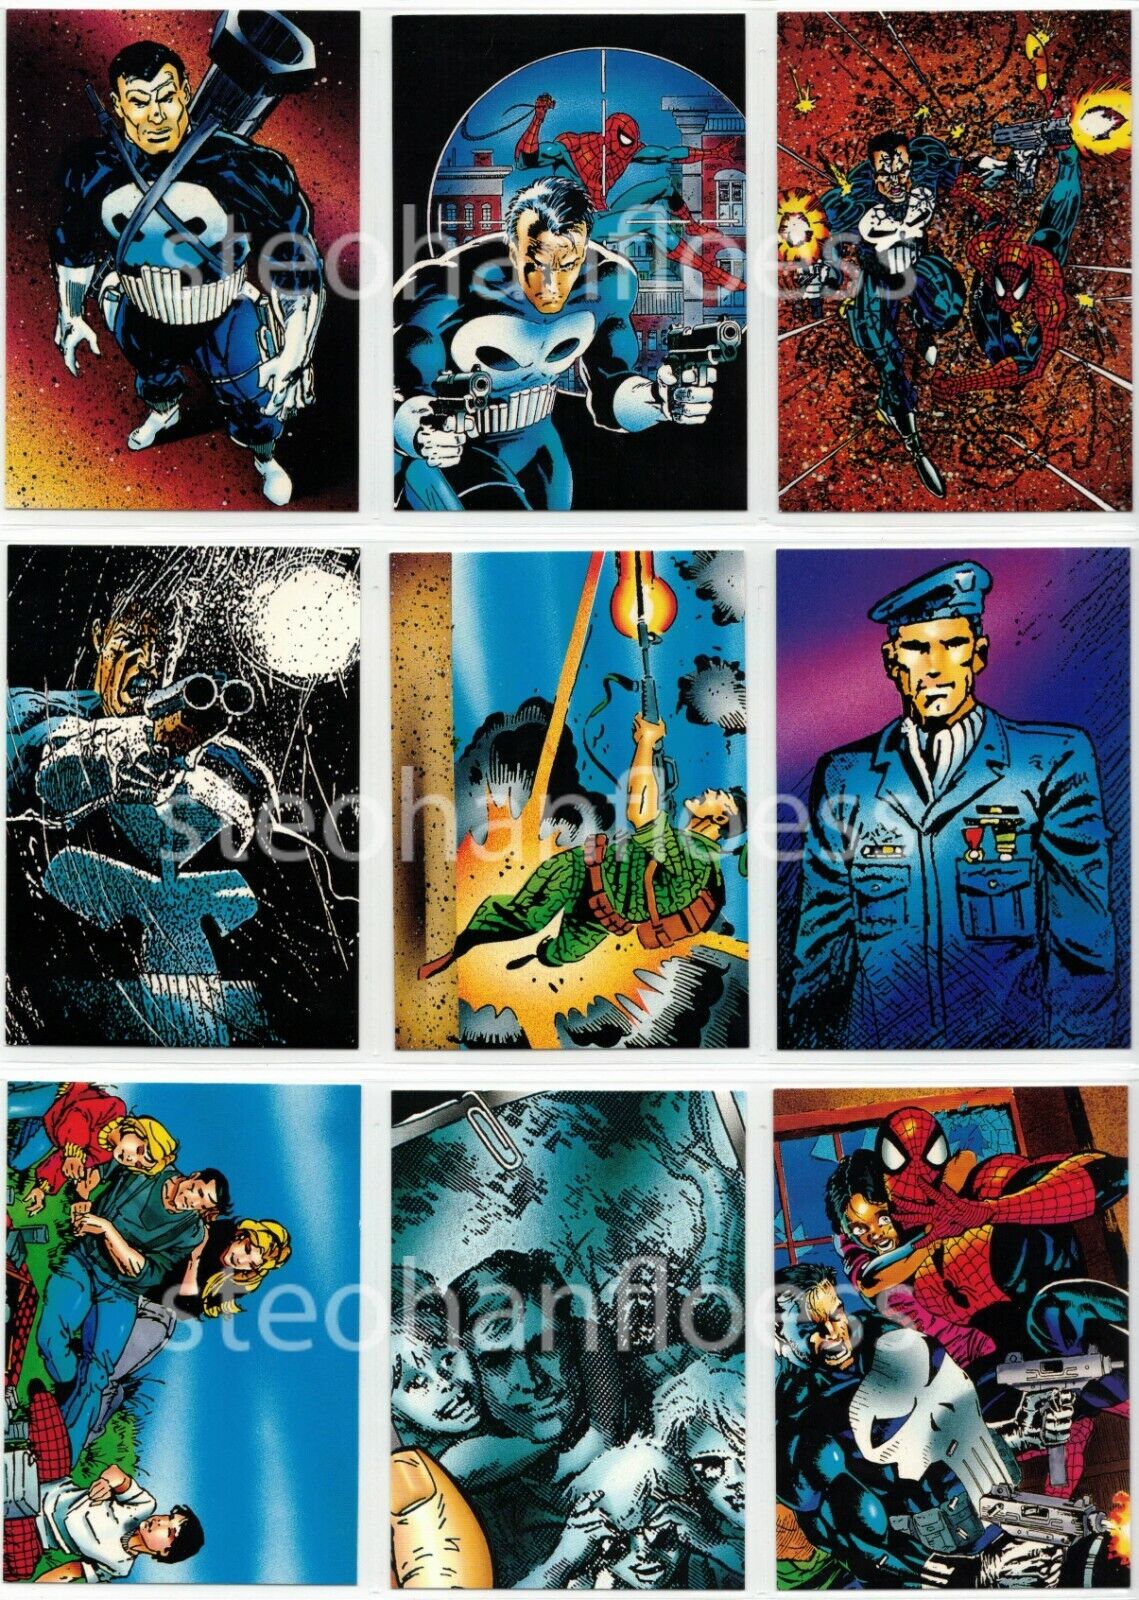 1992 Comic Images Punisher War Journal Entry You Pick the Card Finish Your Set